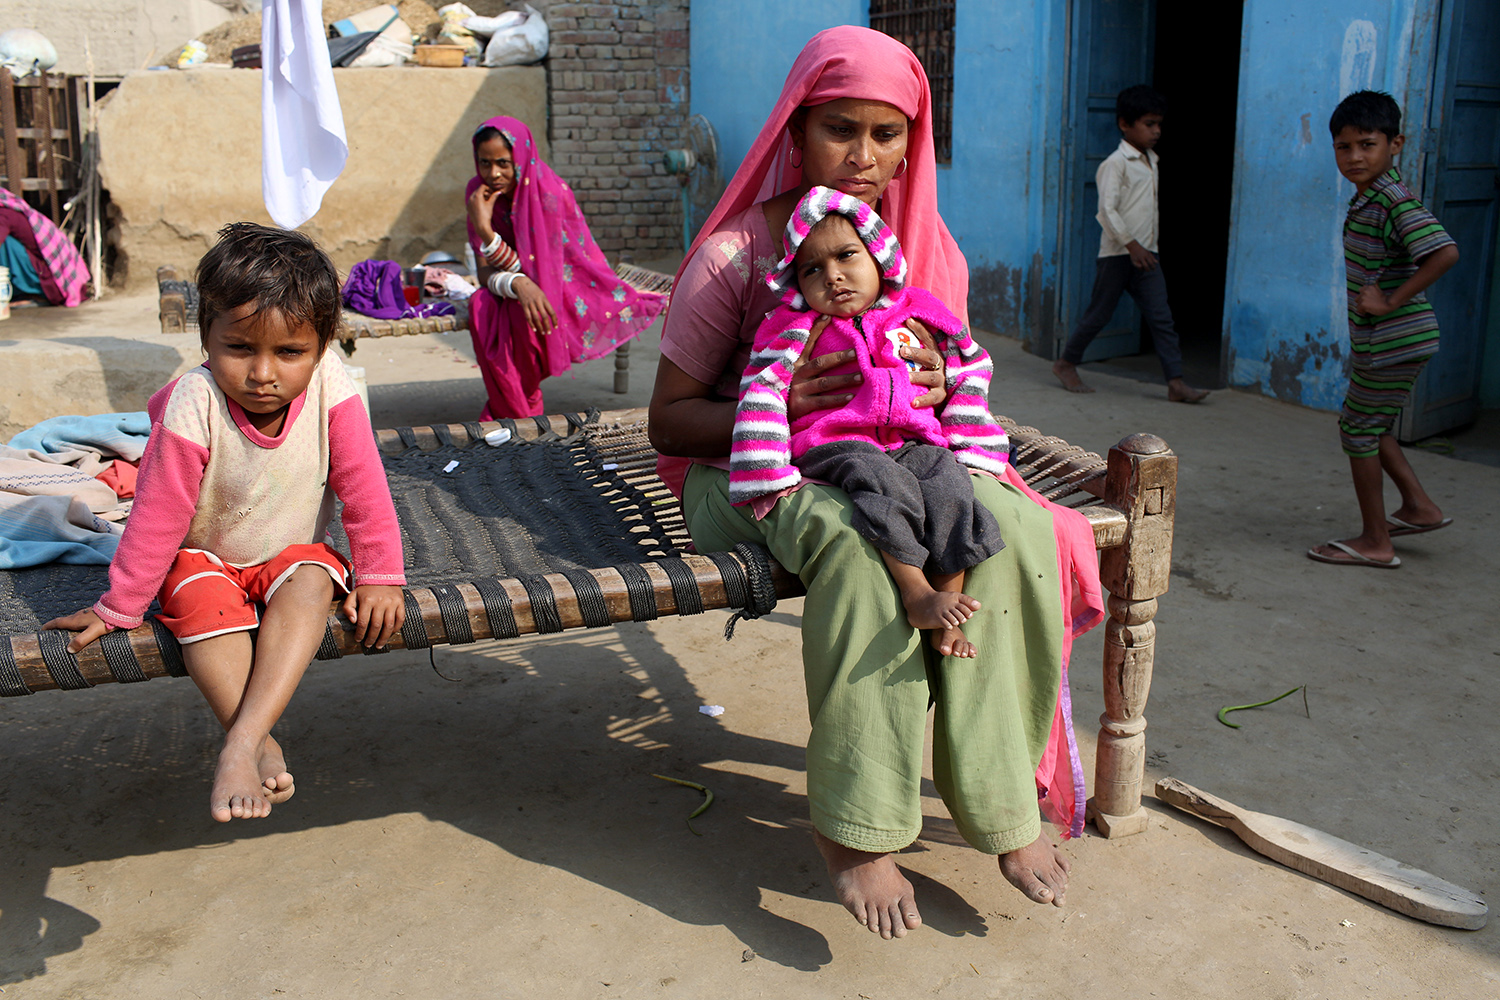 Survana, 27, holds her youngest child Reetu, 2, who has suffered from spastic cerebral palsy since birth, outside their home in the village of Teejaruhela. She is one of many children in the village who suffer from development health issues. Image by Sean Gallagher. India, 2013.